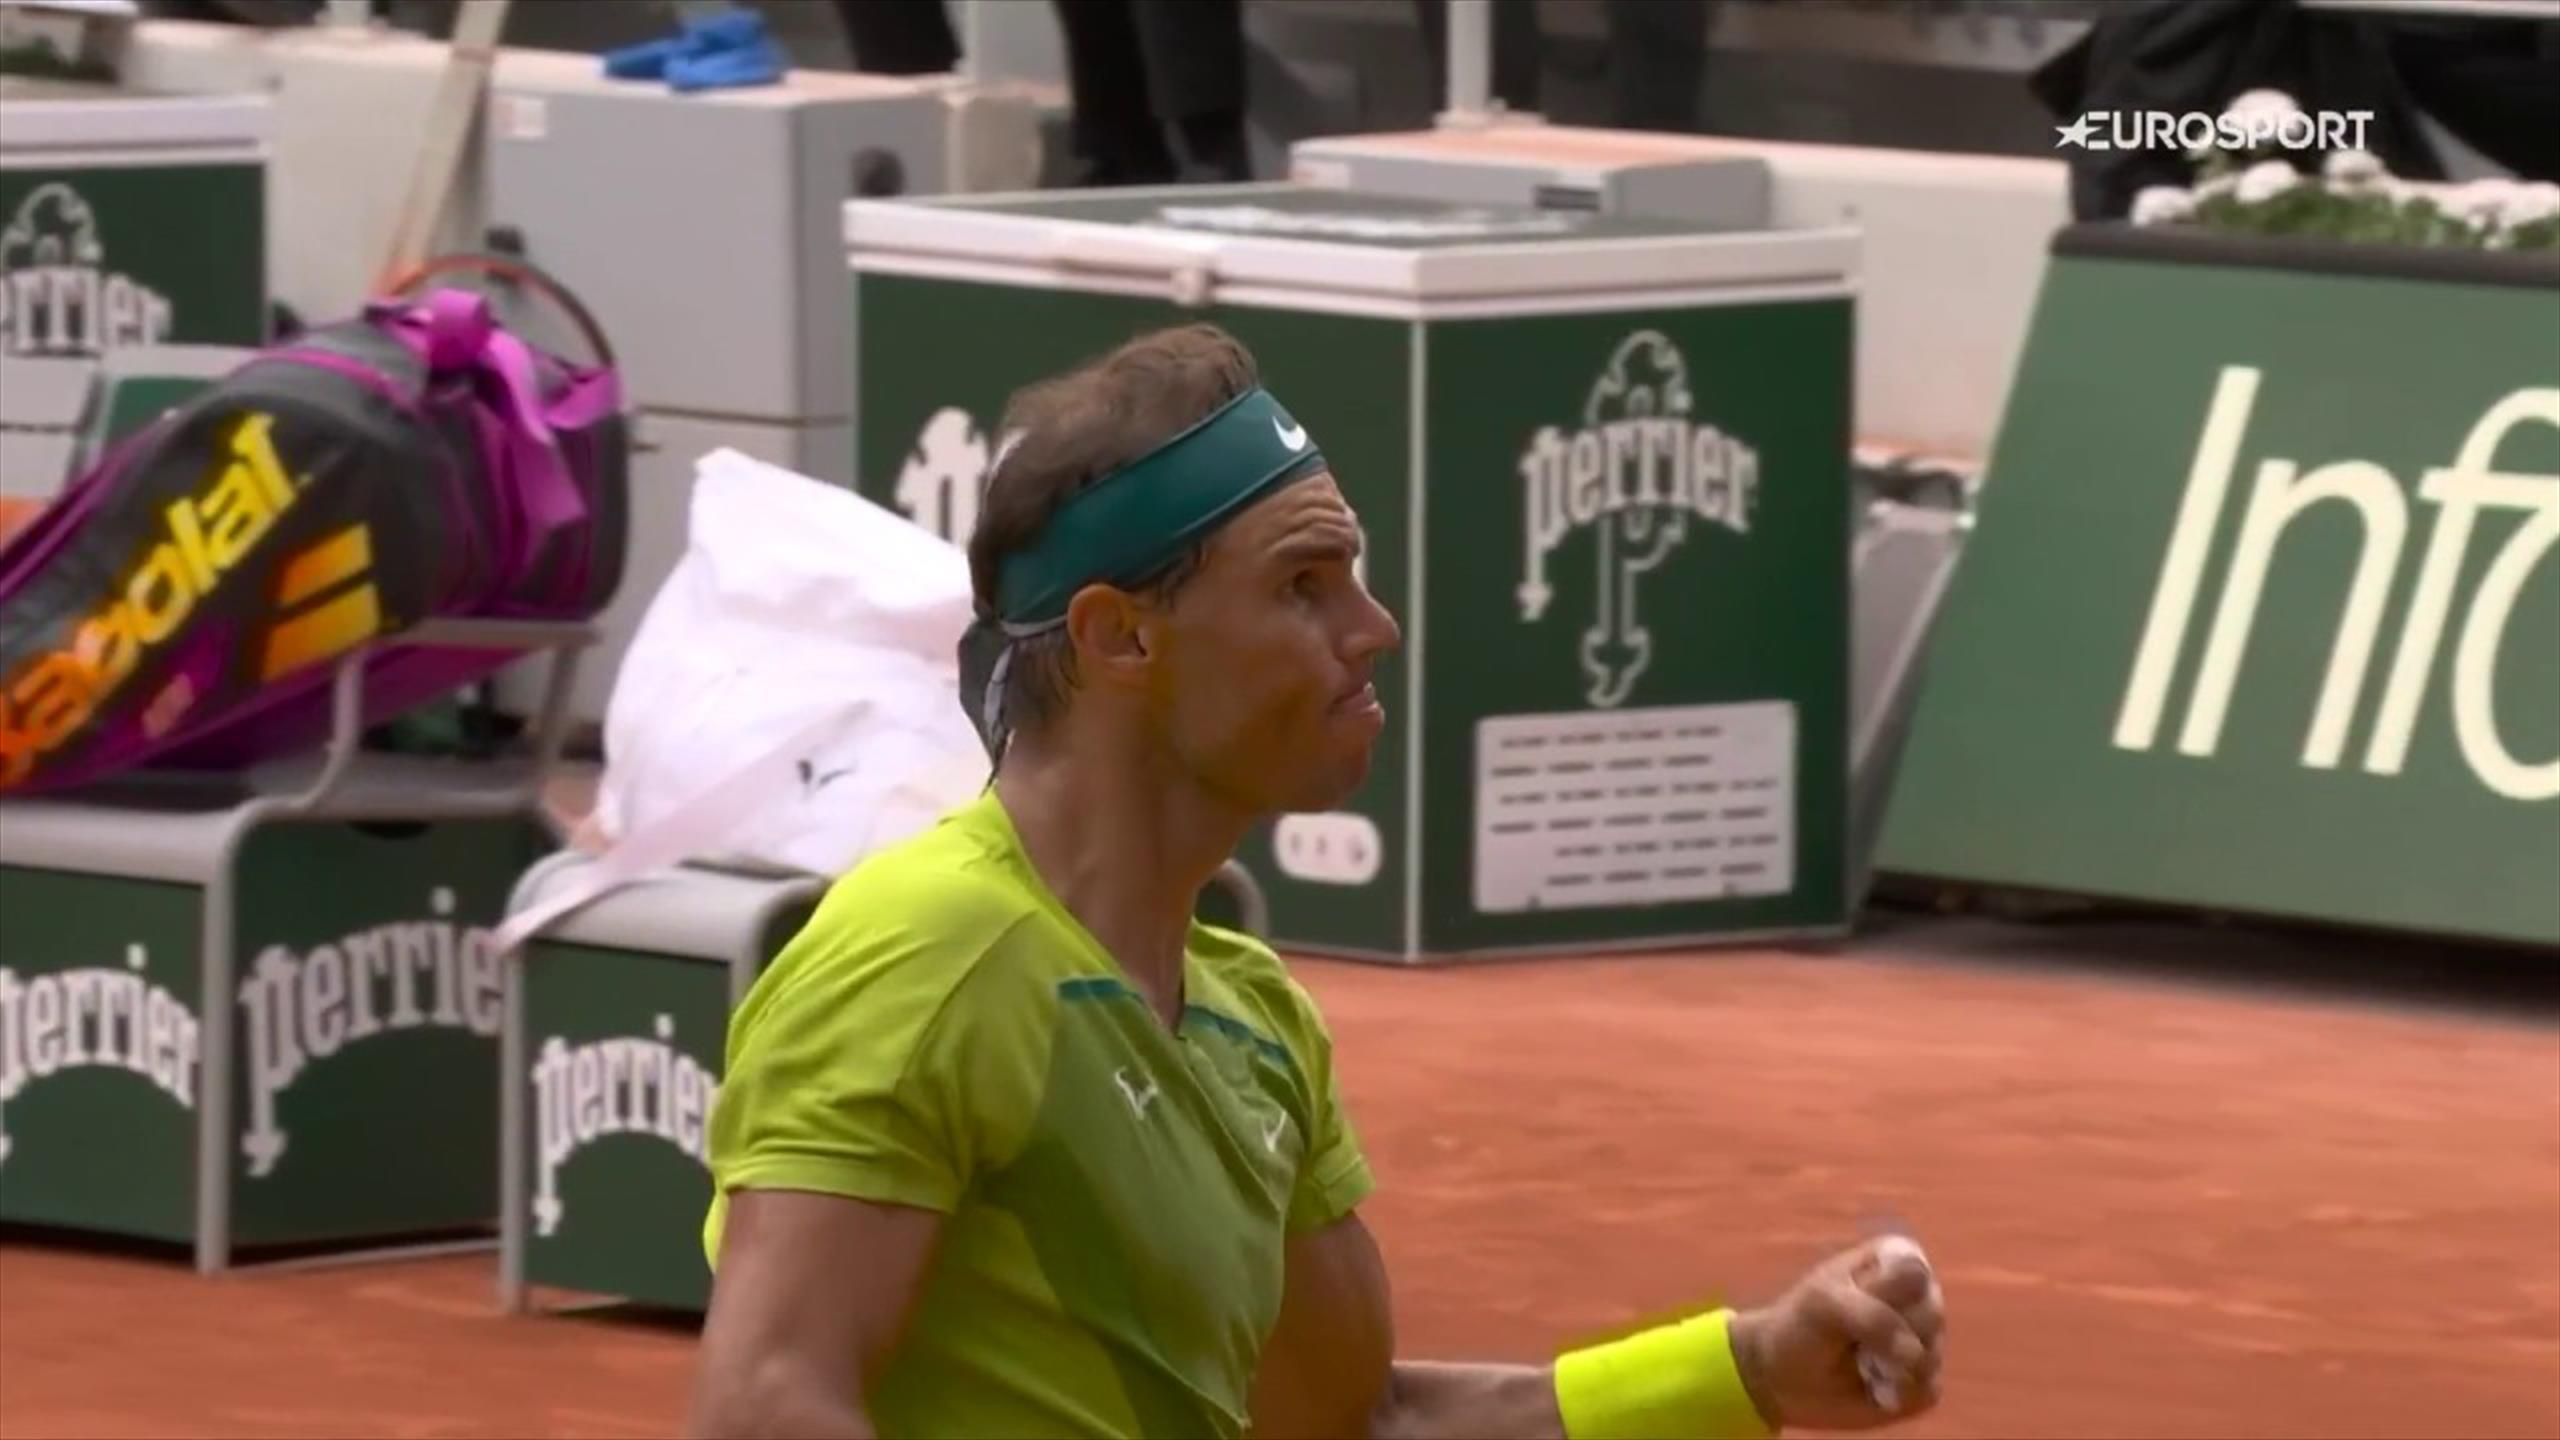 Nadal will be delighted - Watch as Rafael Nadal takes opening set in French Open final against Casper Ruud - Tennis video